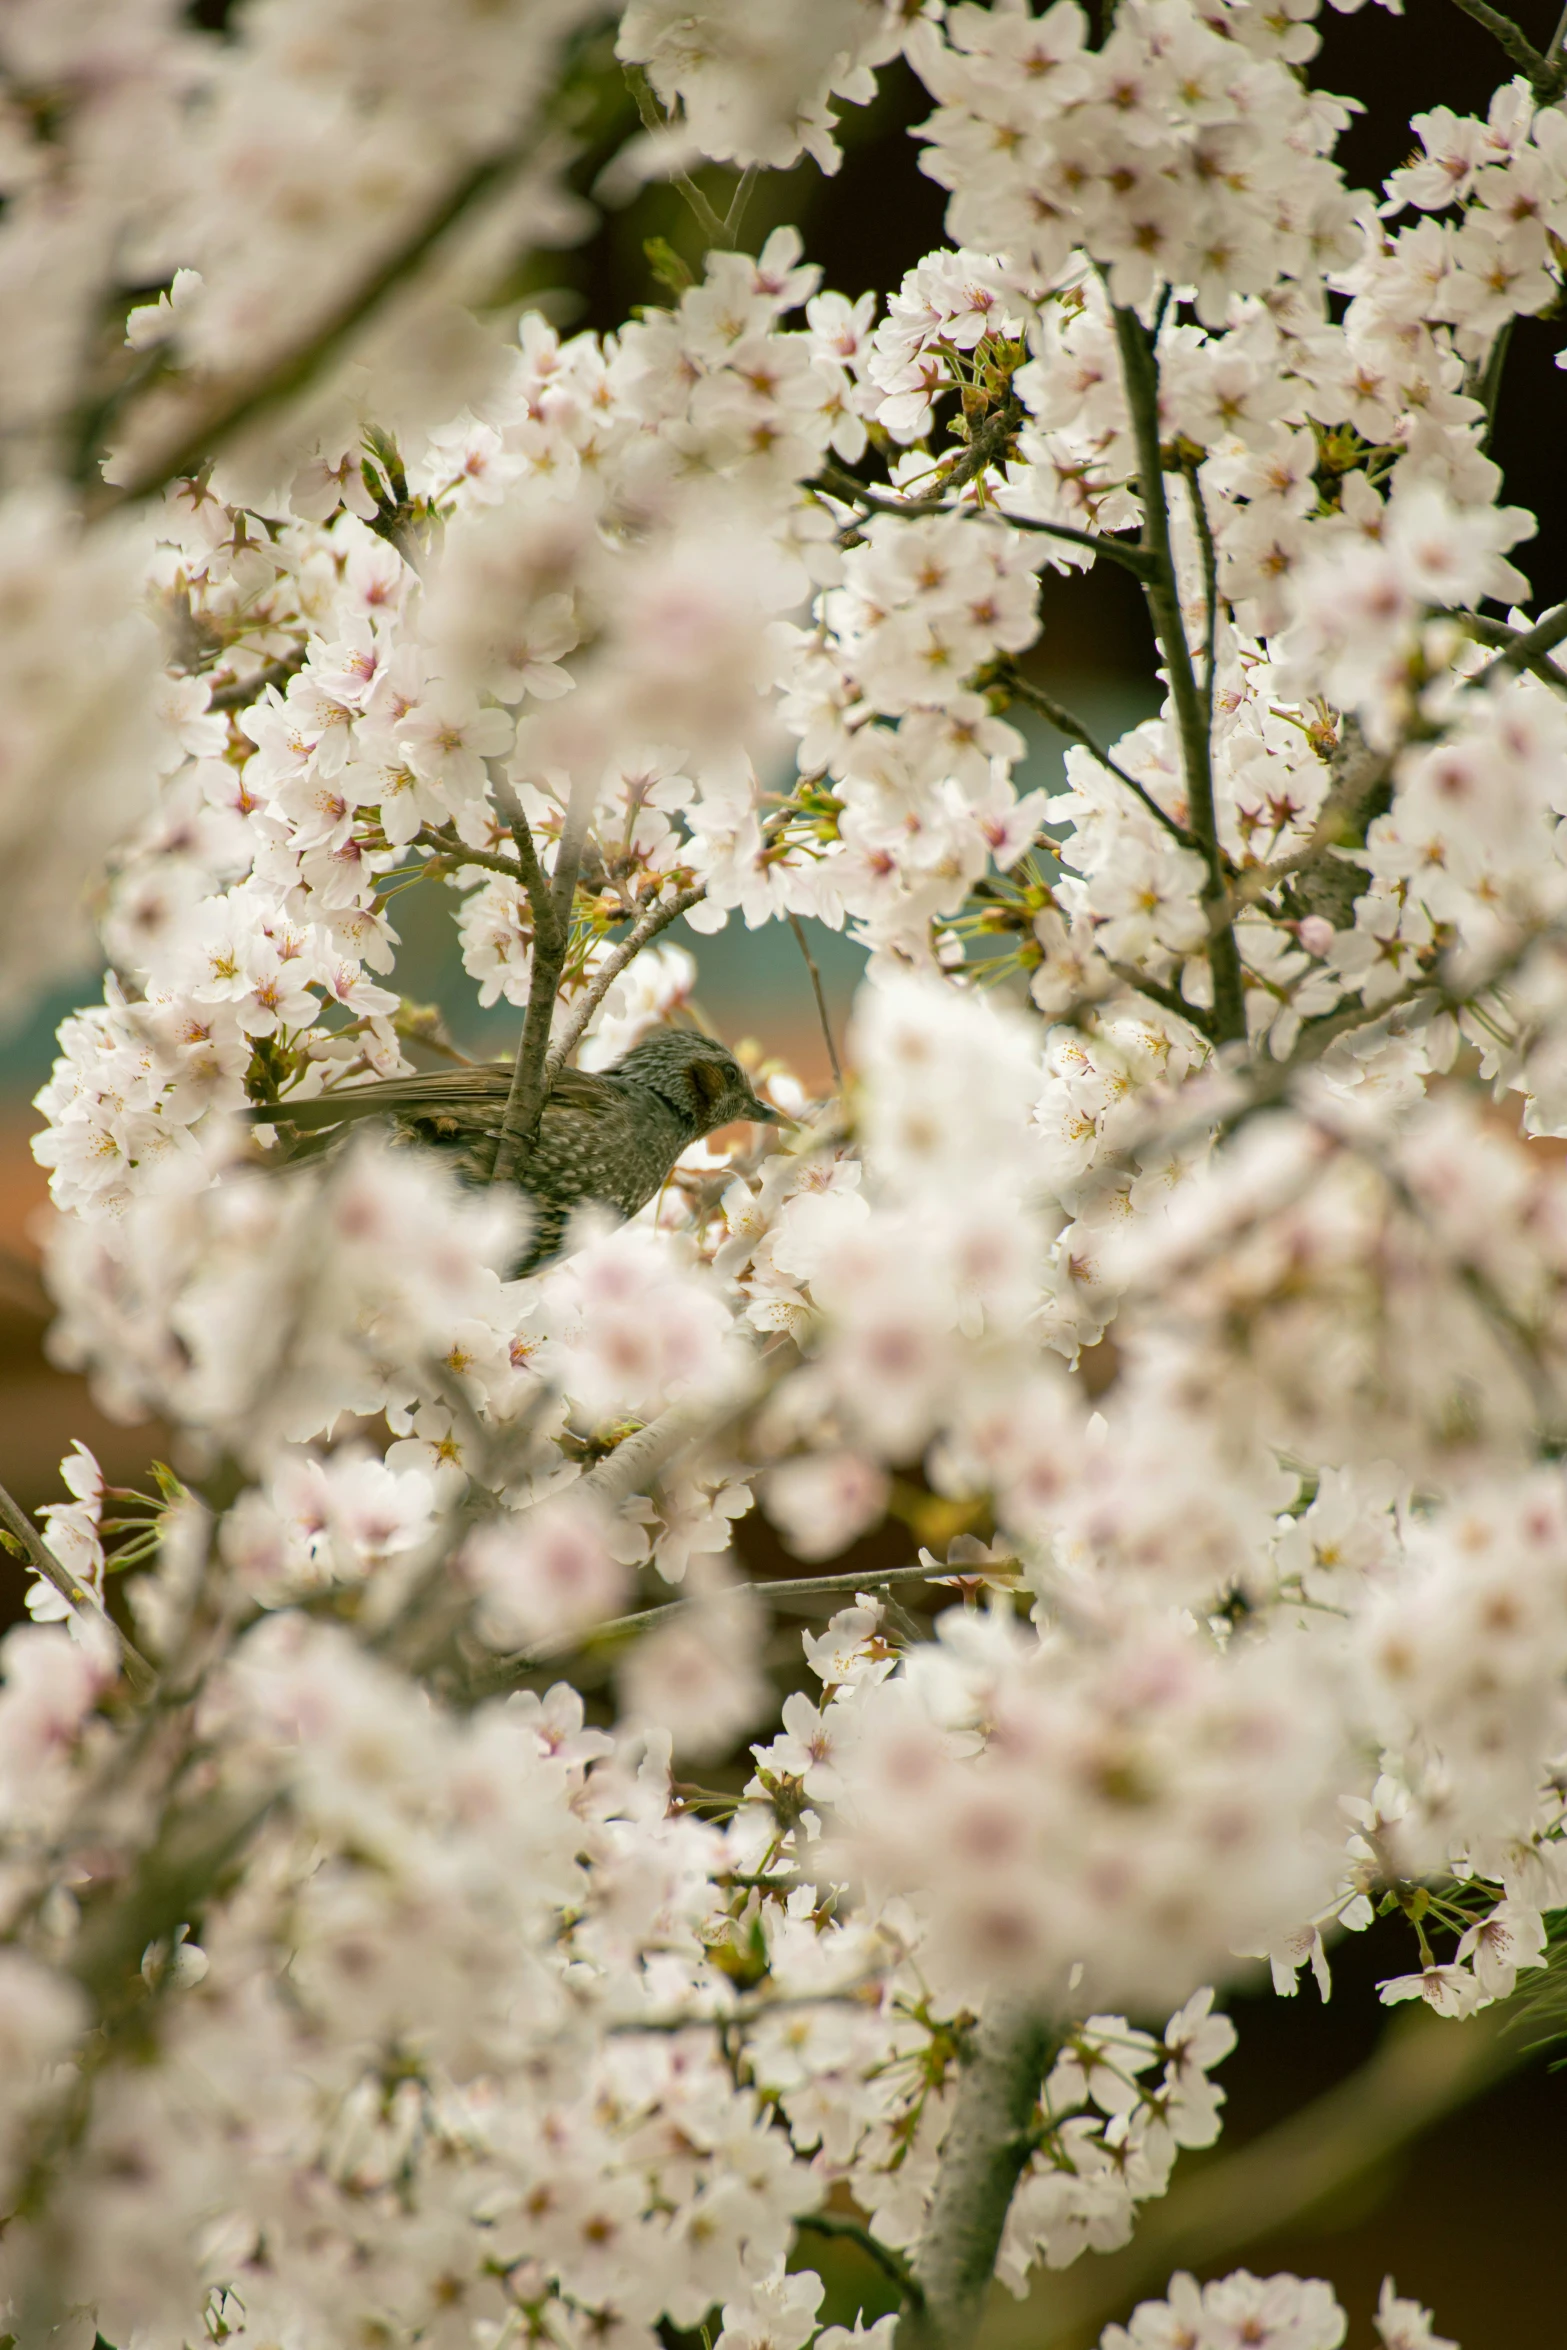 a close up image of a tree filled with white flowers